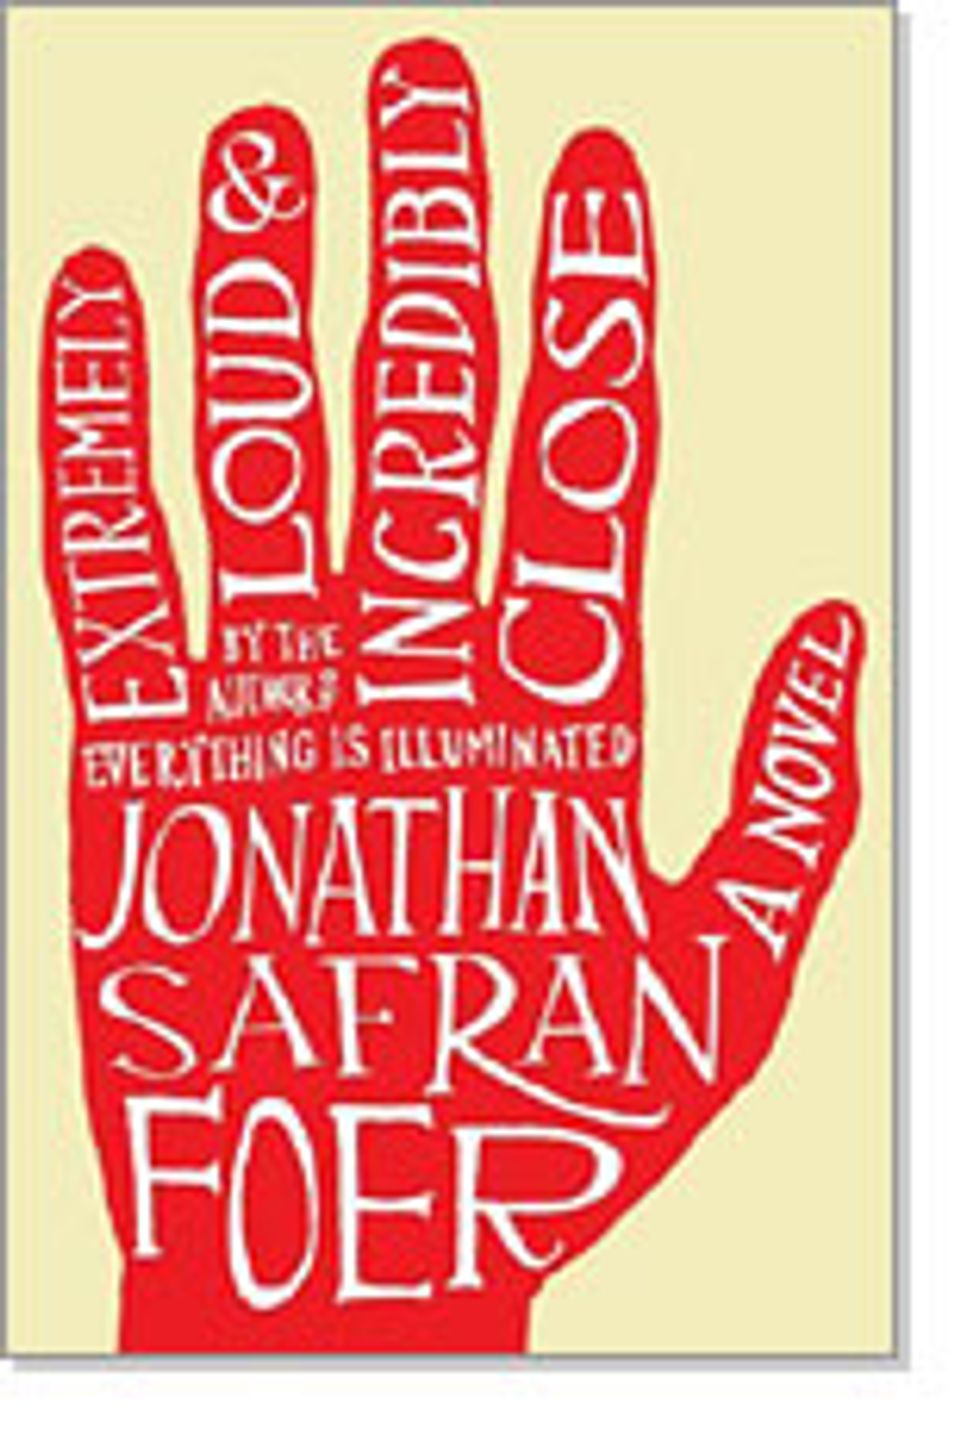 extremely loud and incredibly close by jonathan foer